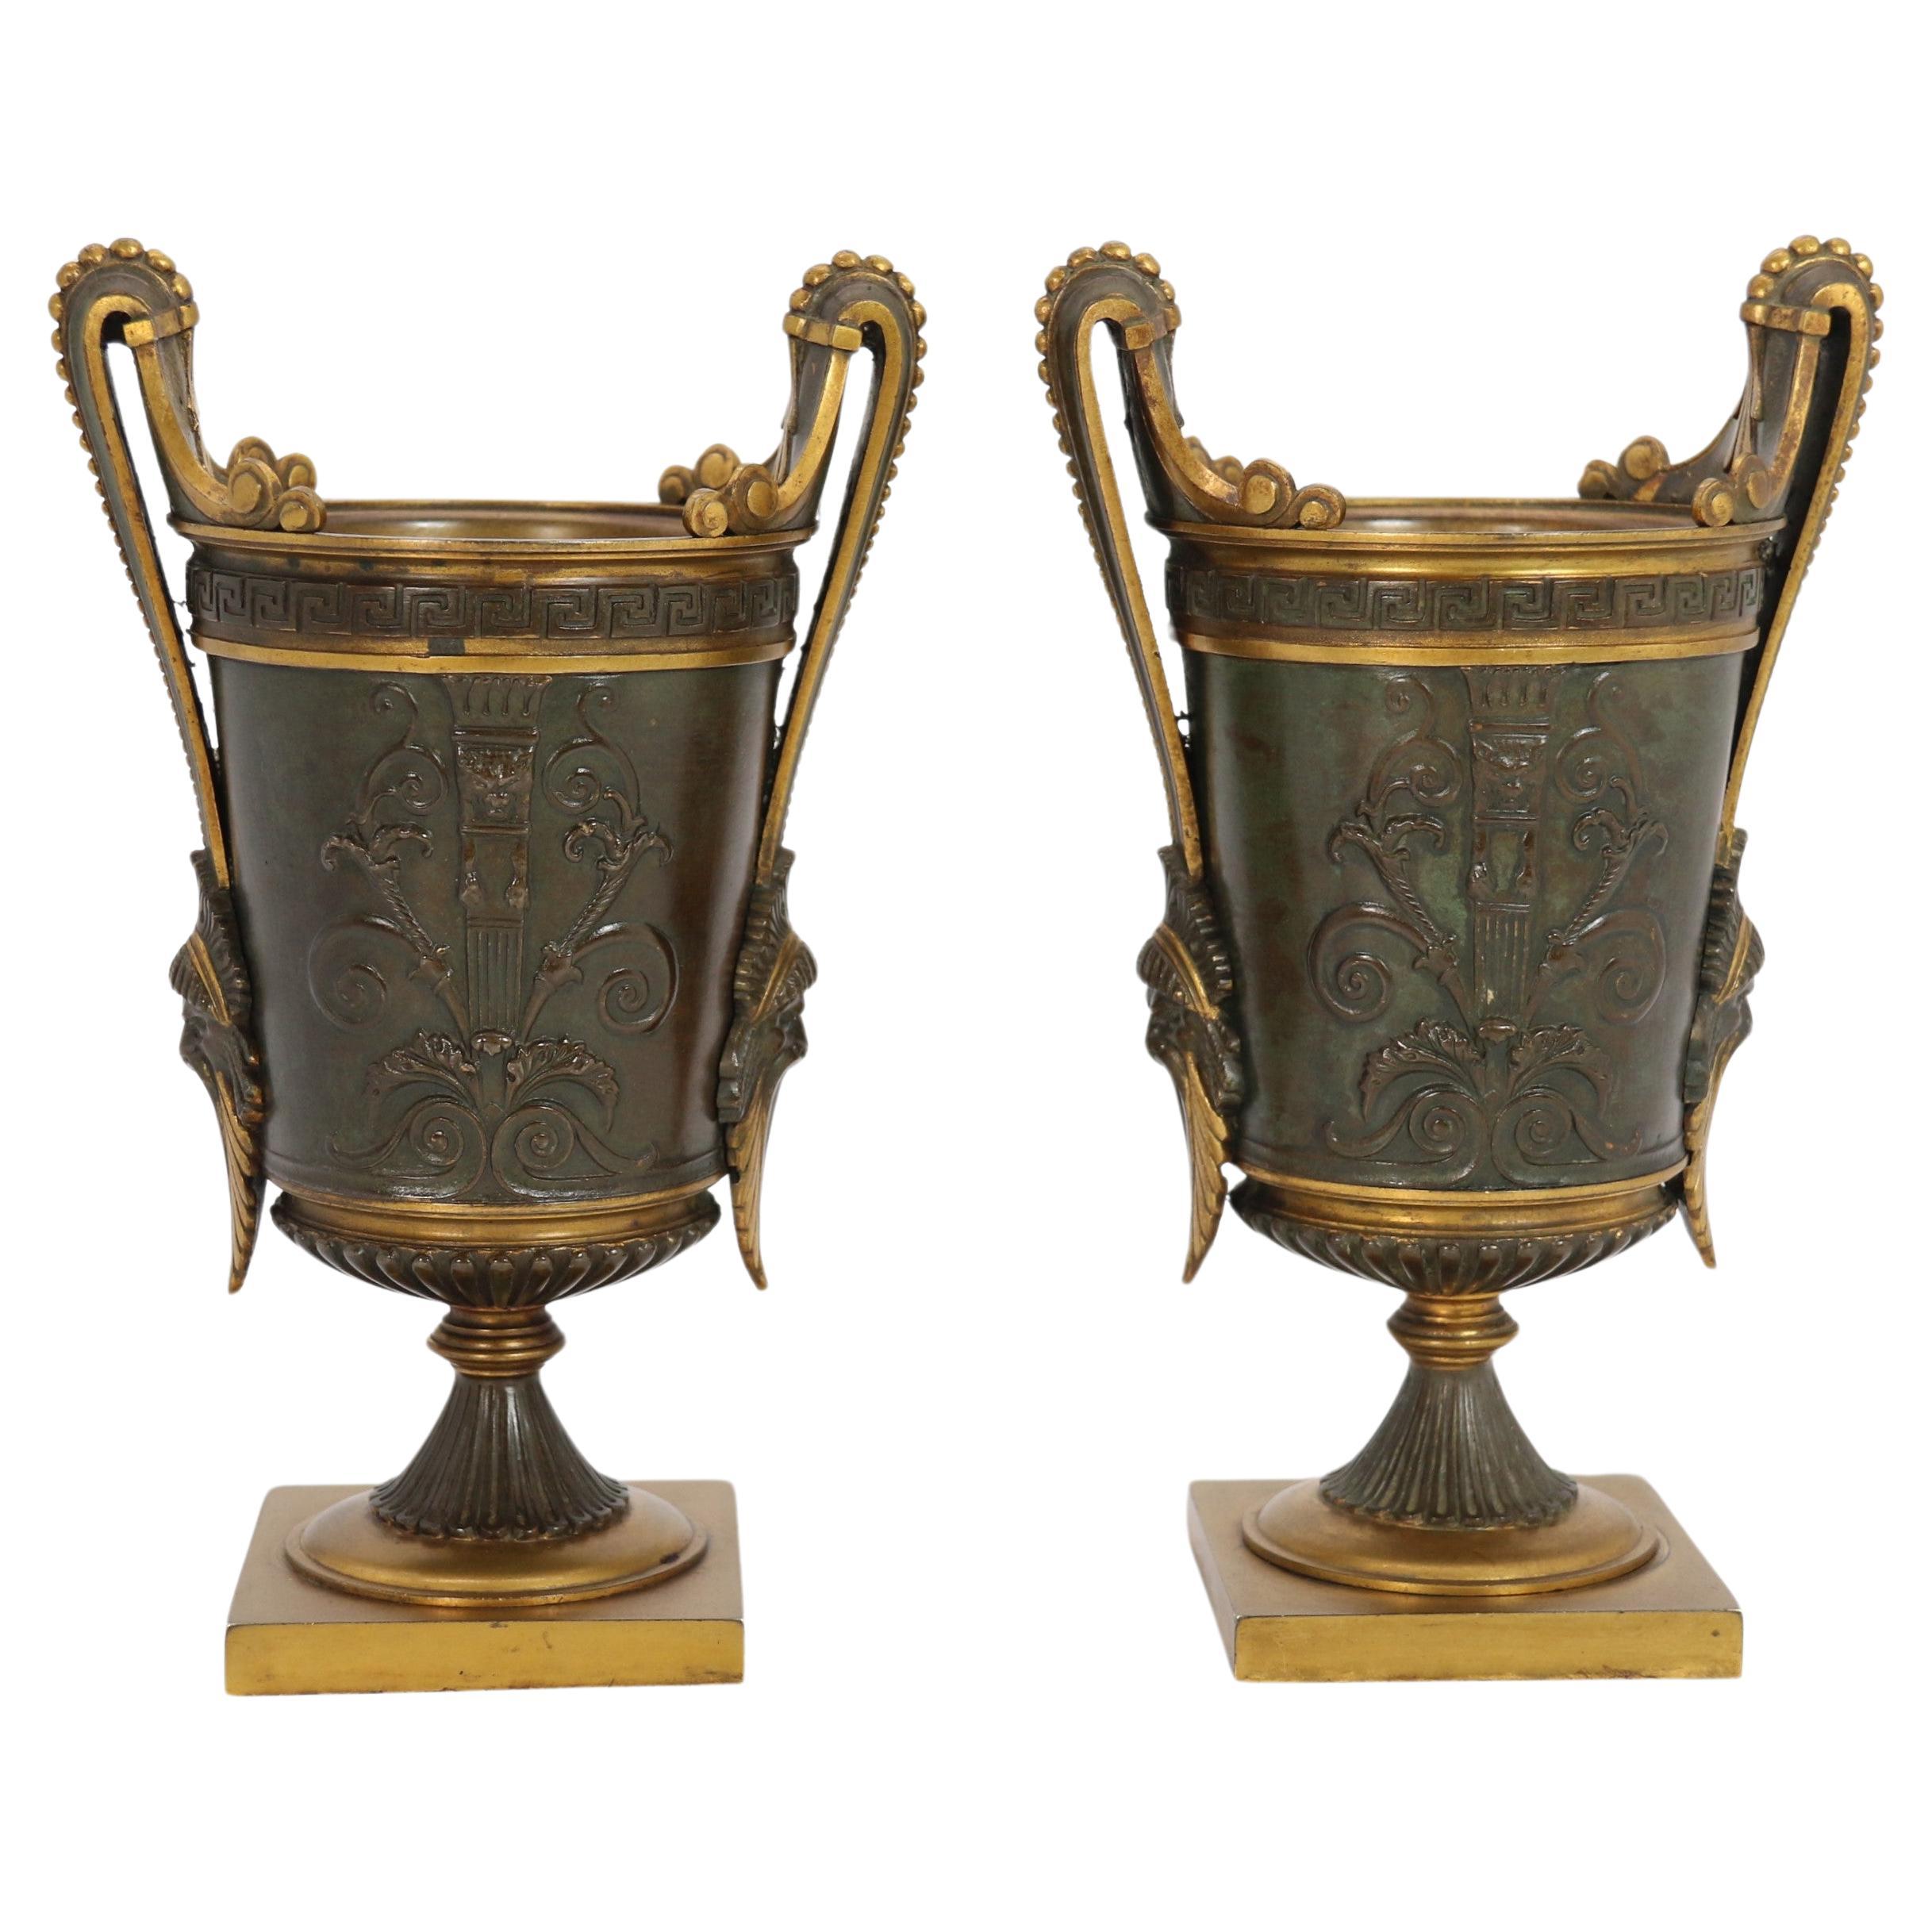 Empire period bronze and ormolu Grecian style pair of classical urns, circa 1830 For Sale